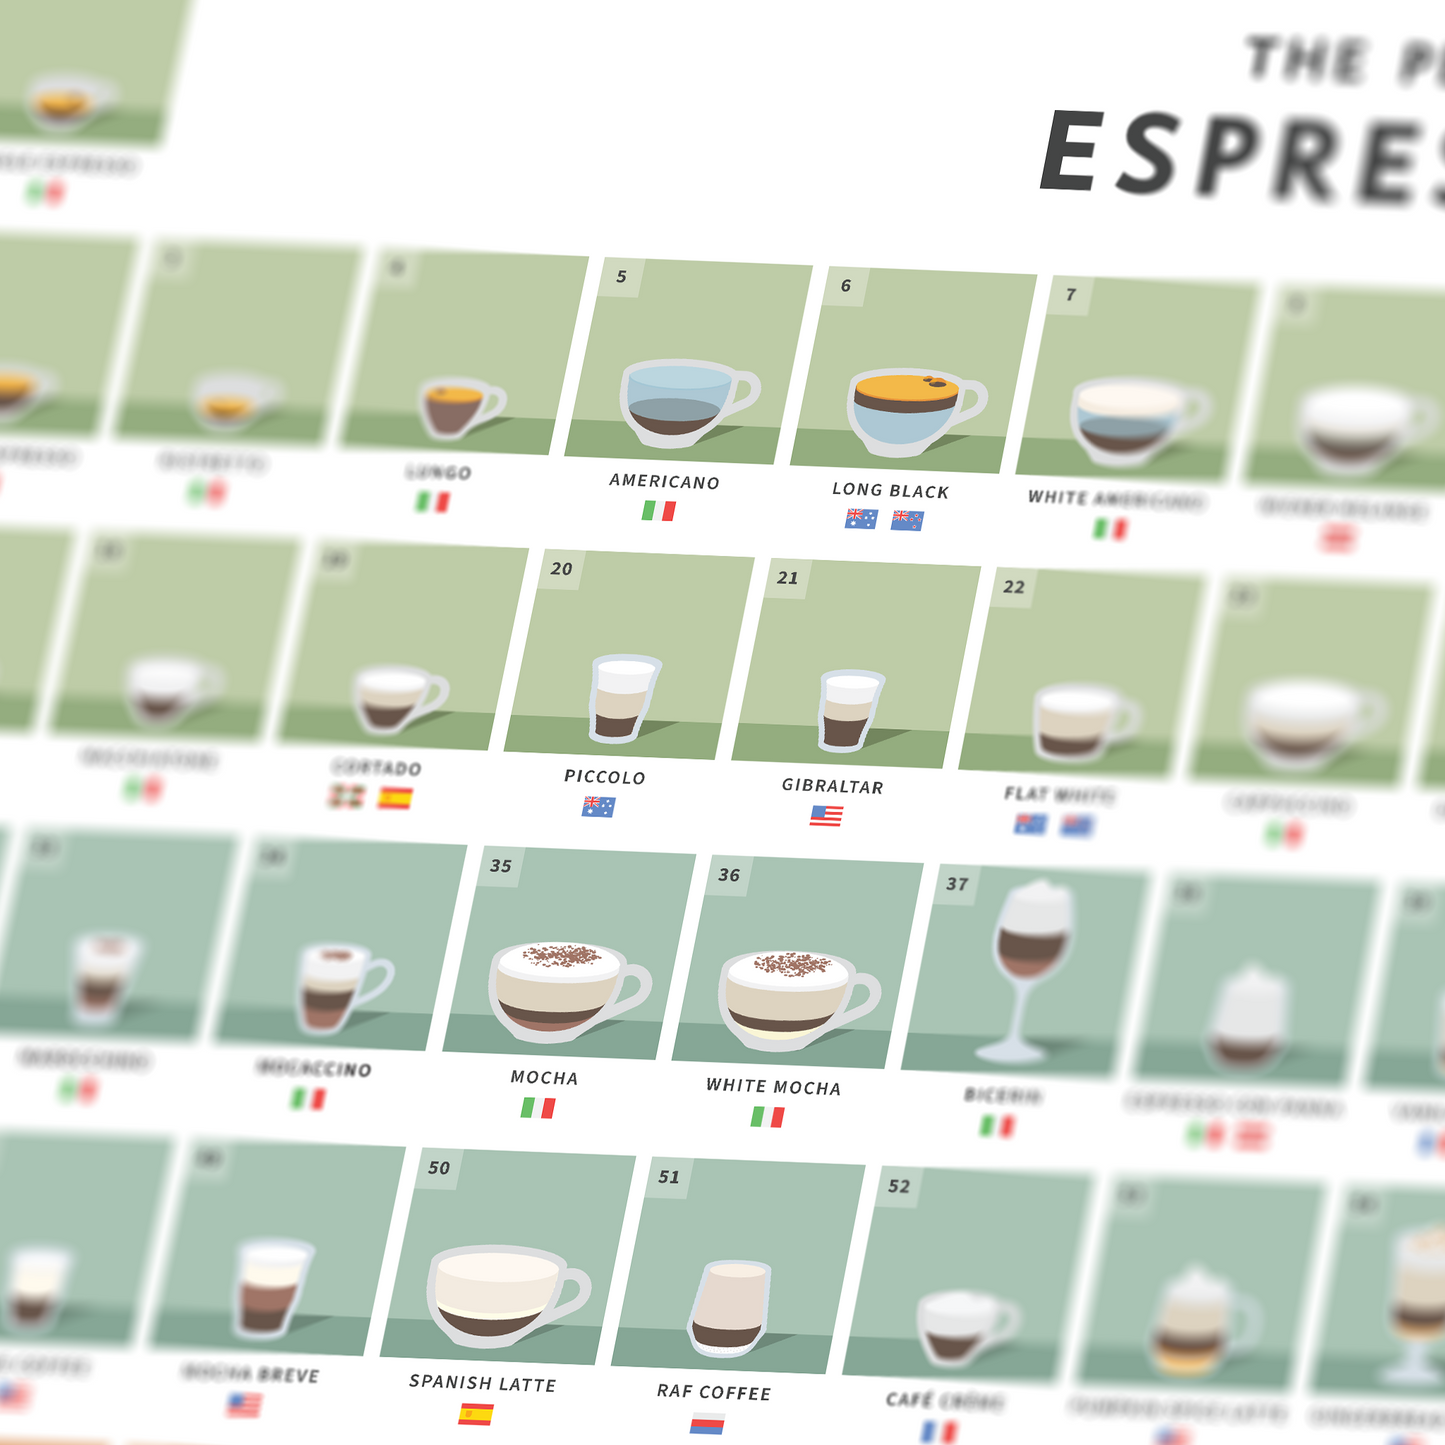 The Periodic Table of Espresso Drinks Poster — Giclée Print